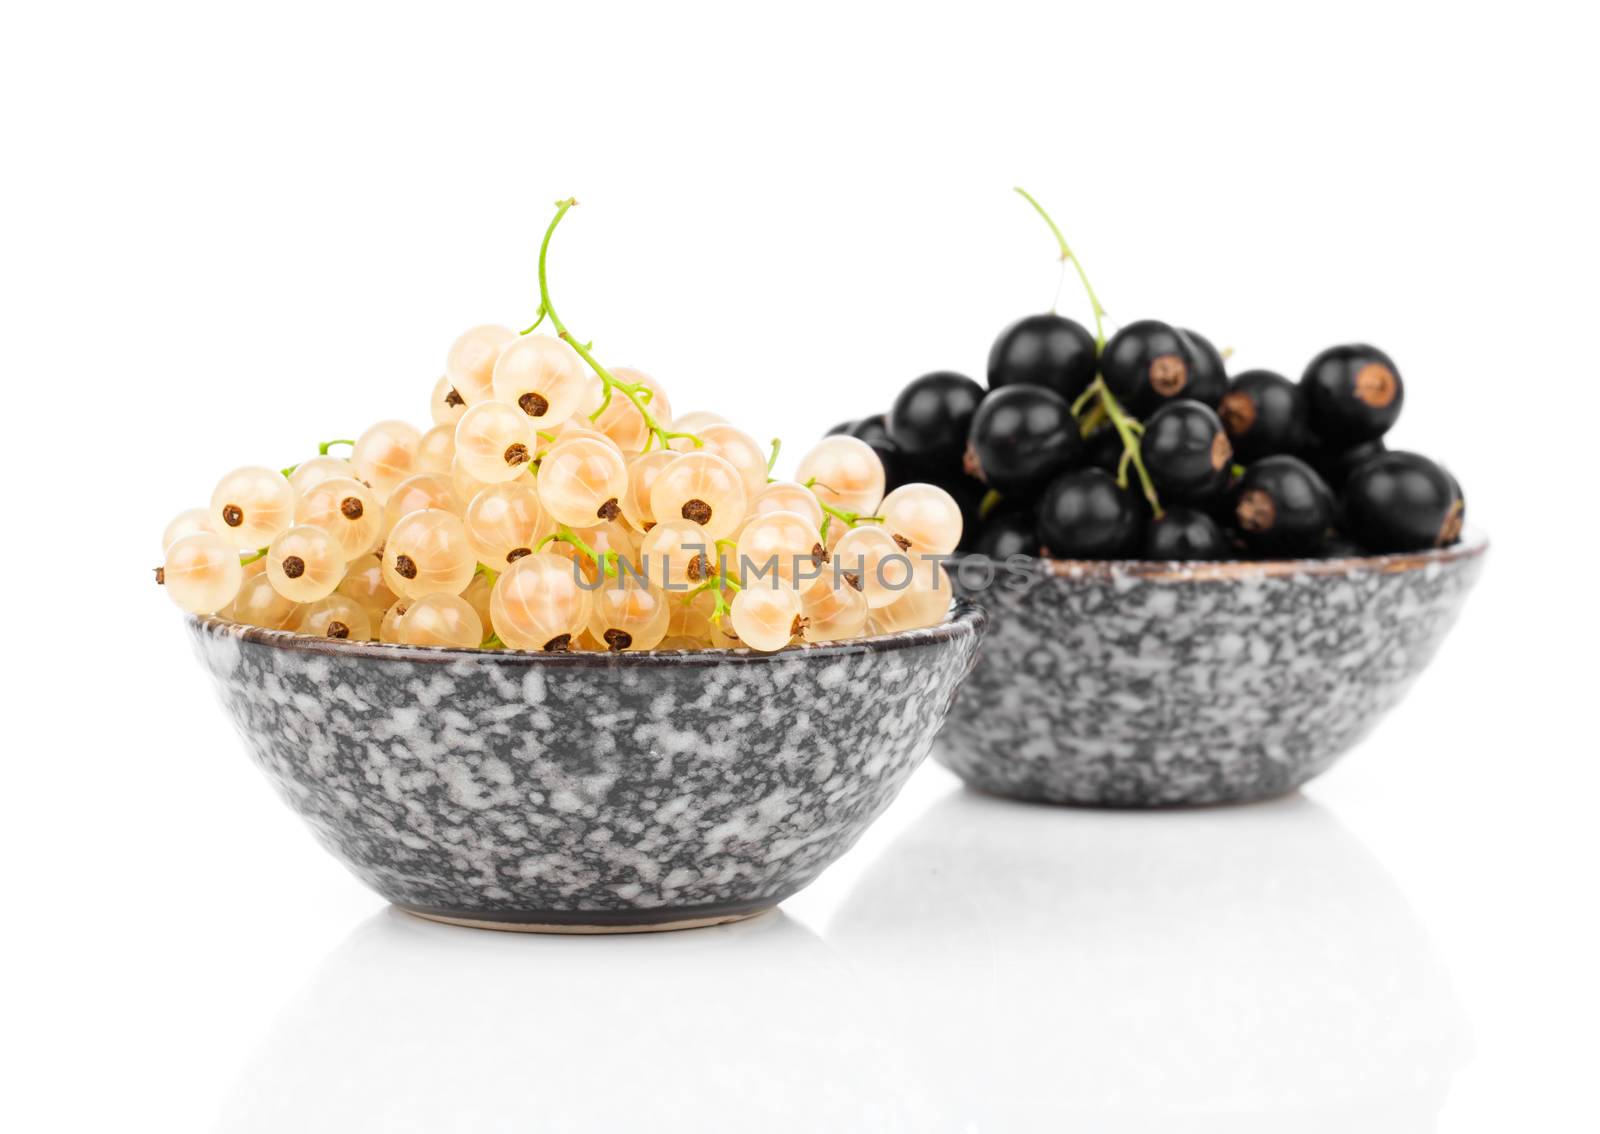 White currant fruit in a bowl, isolated over white background.